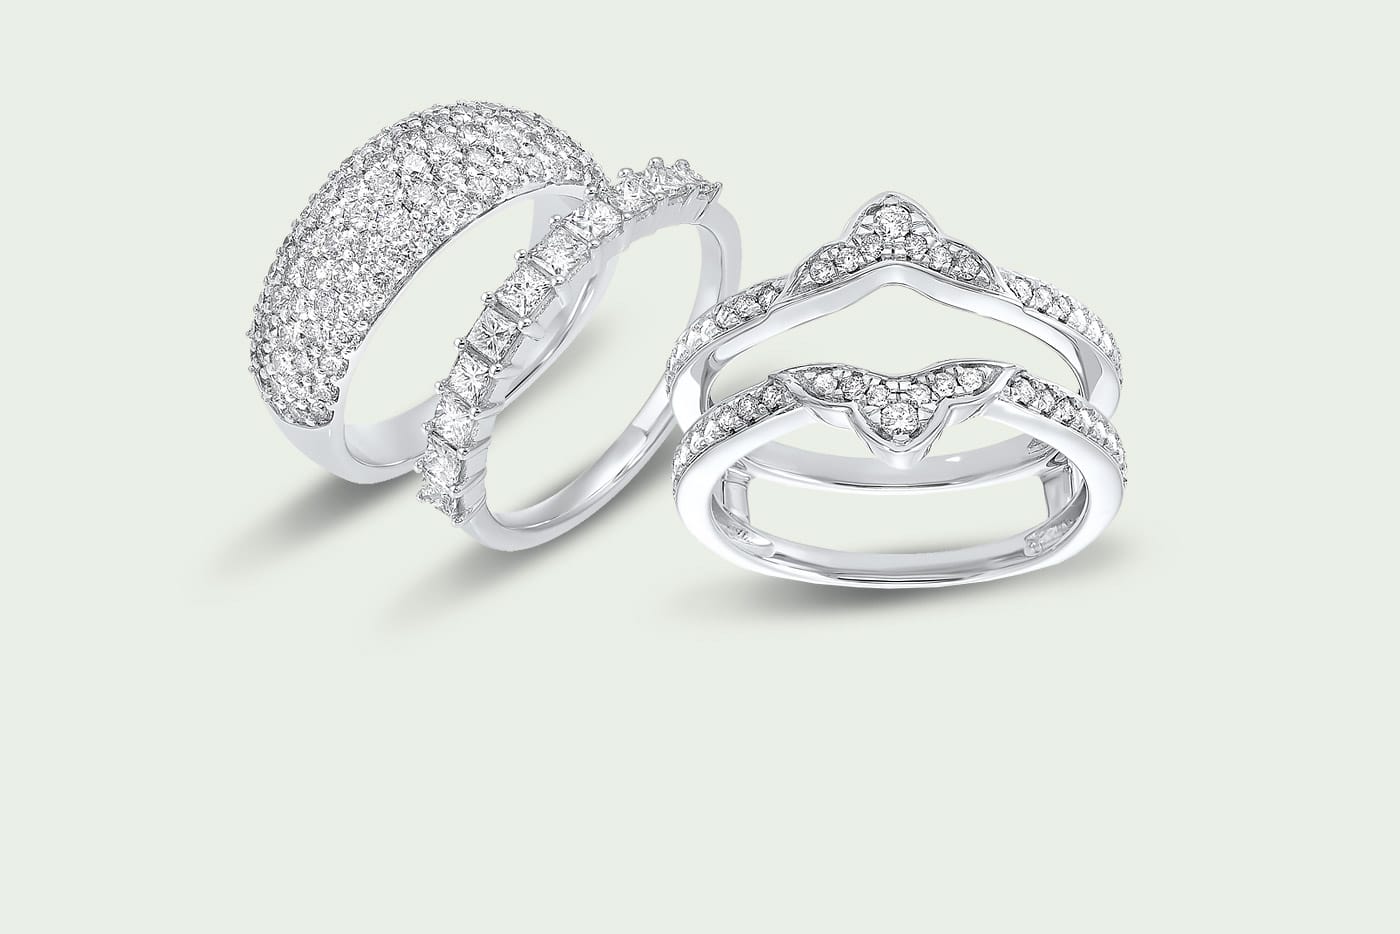 Ladies wedding band collection